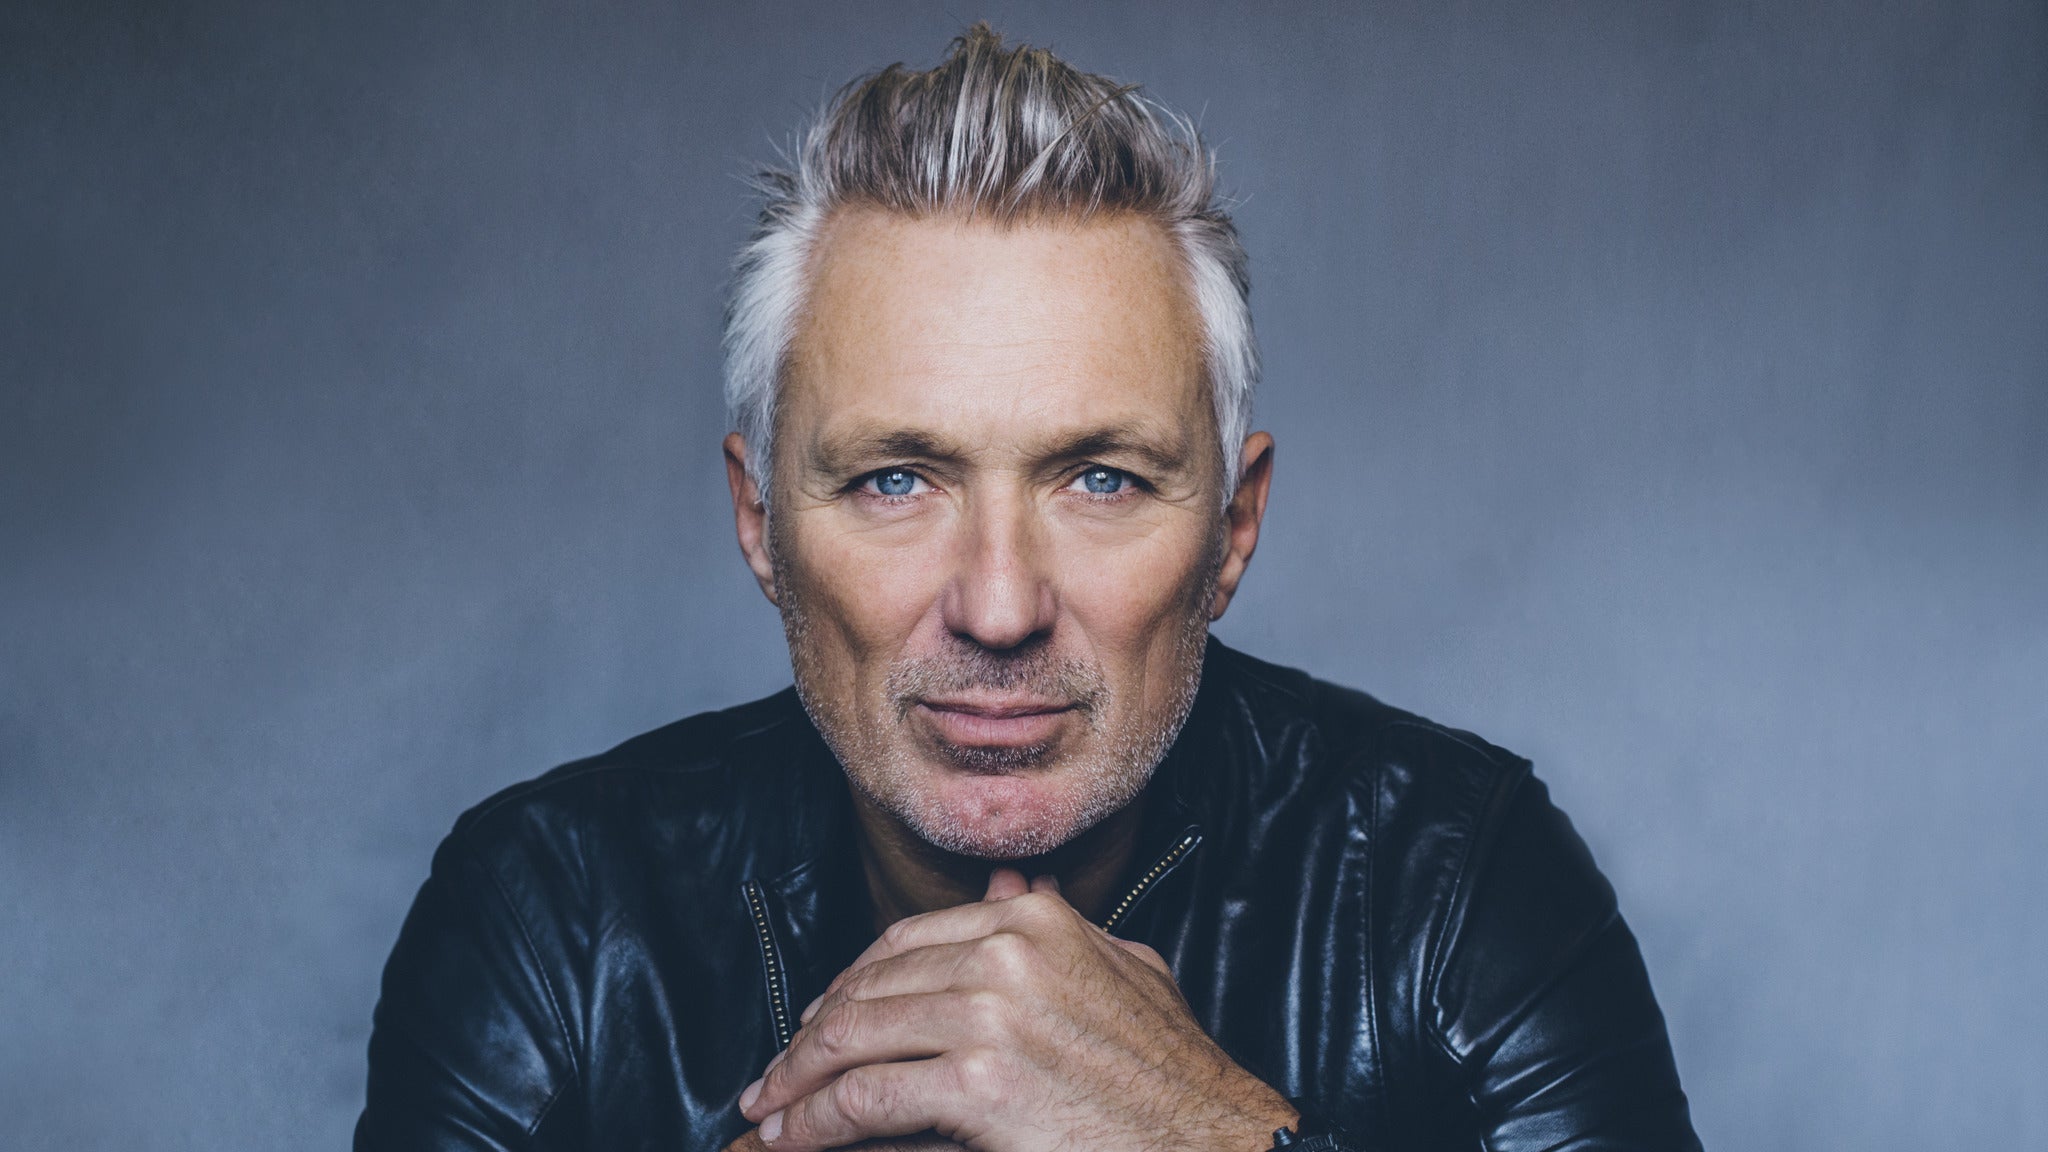 Martin Kemp Ultimate Back to The 80s DJ Set in Leeds promo photo for O2 Priority presale offer code